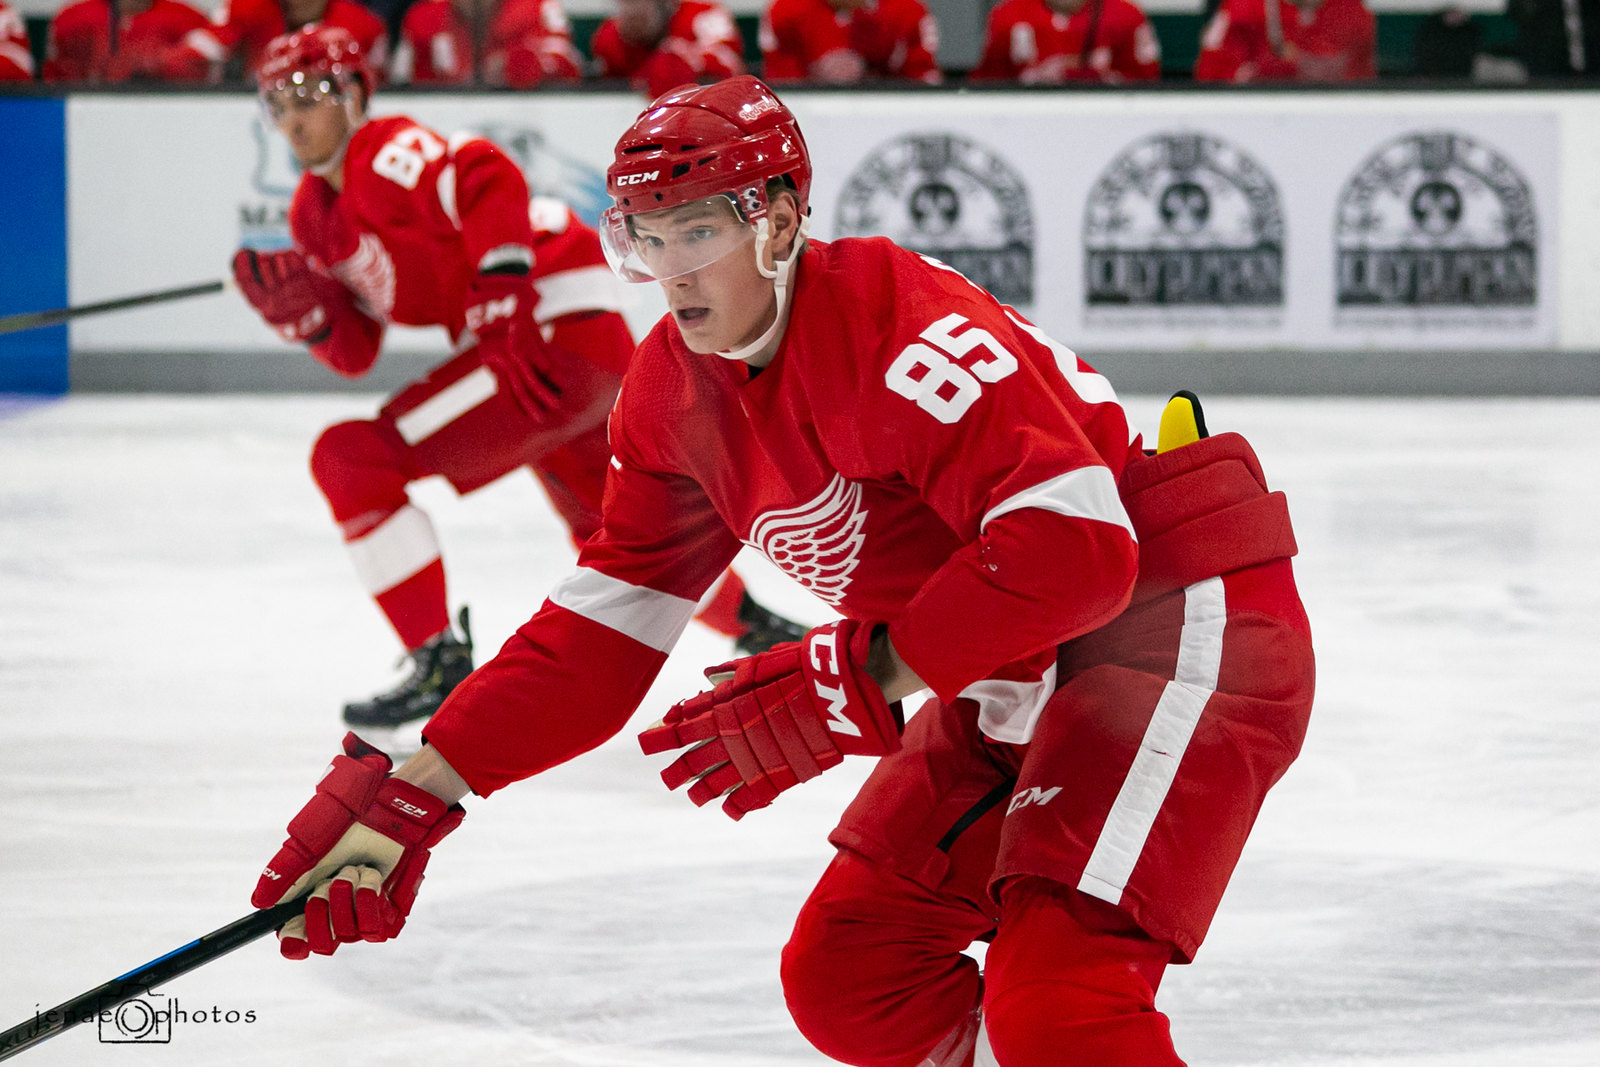 Red Wings' Elmer Soderblom Getting Ready for NHL Ice